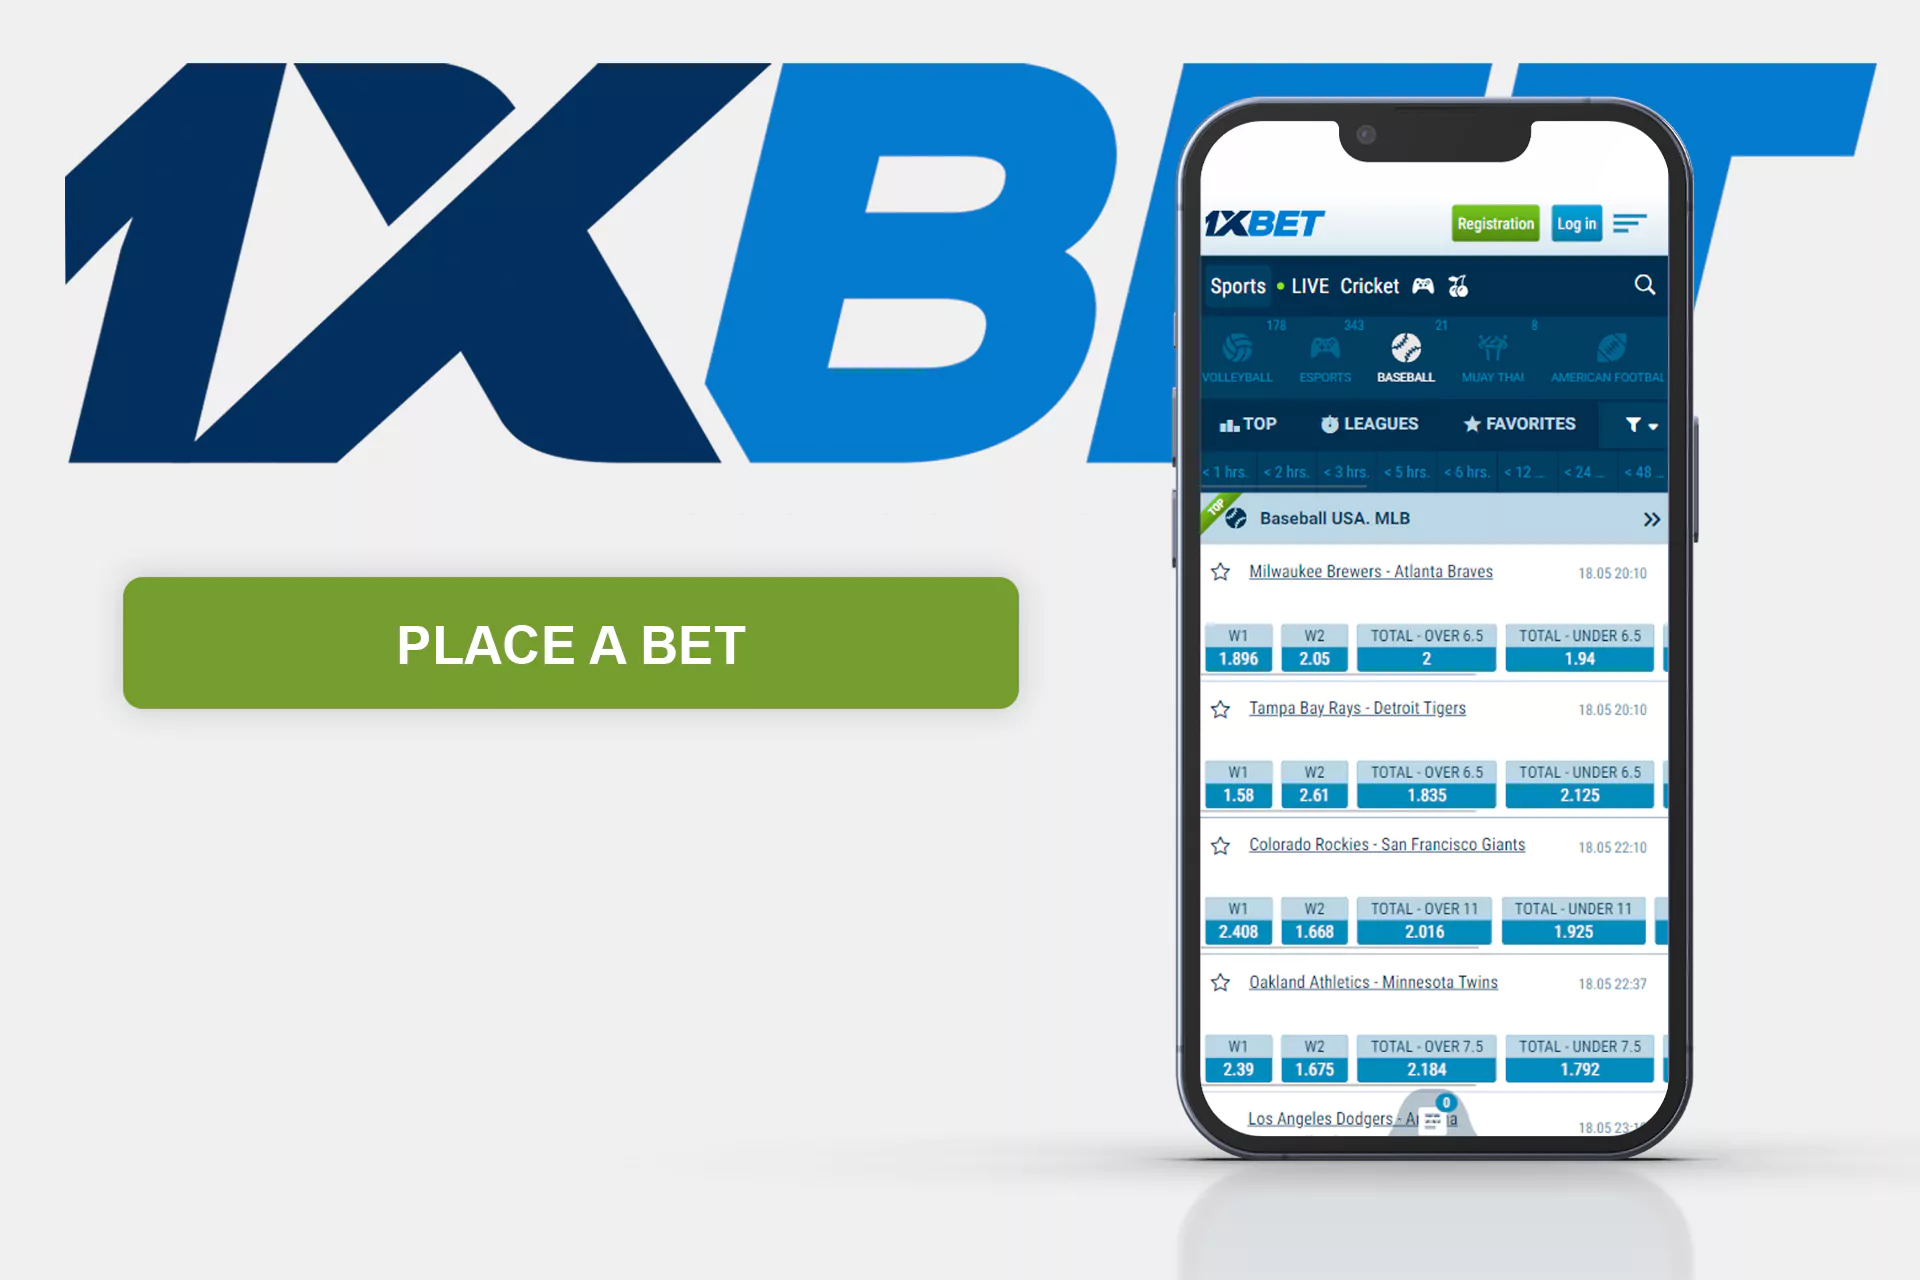 The 1xBet app supports baseball betting online.